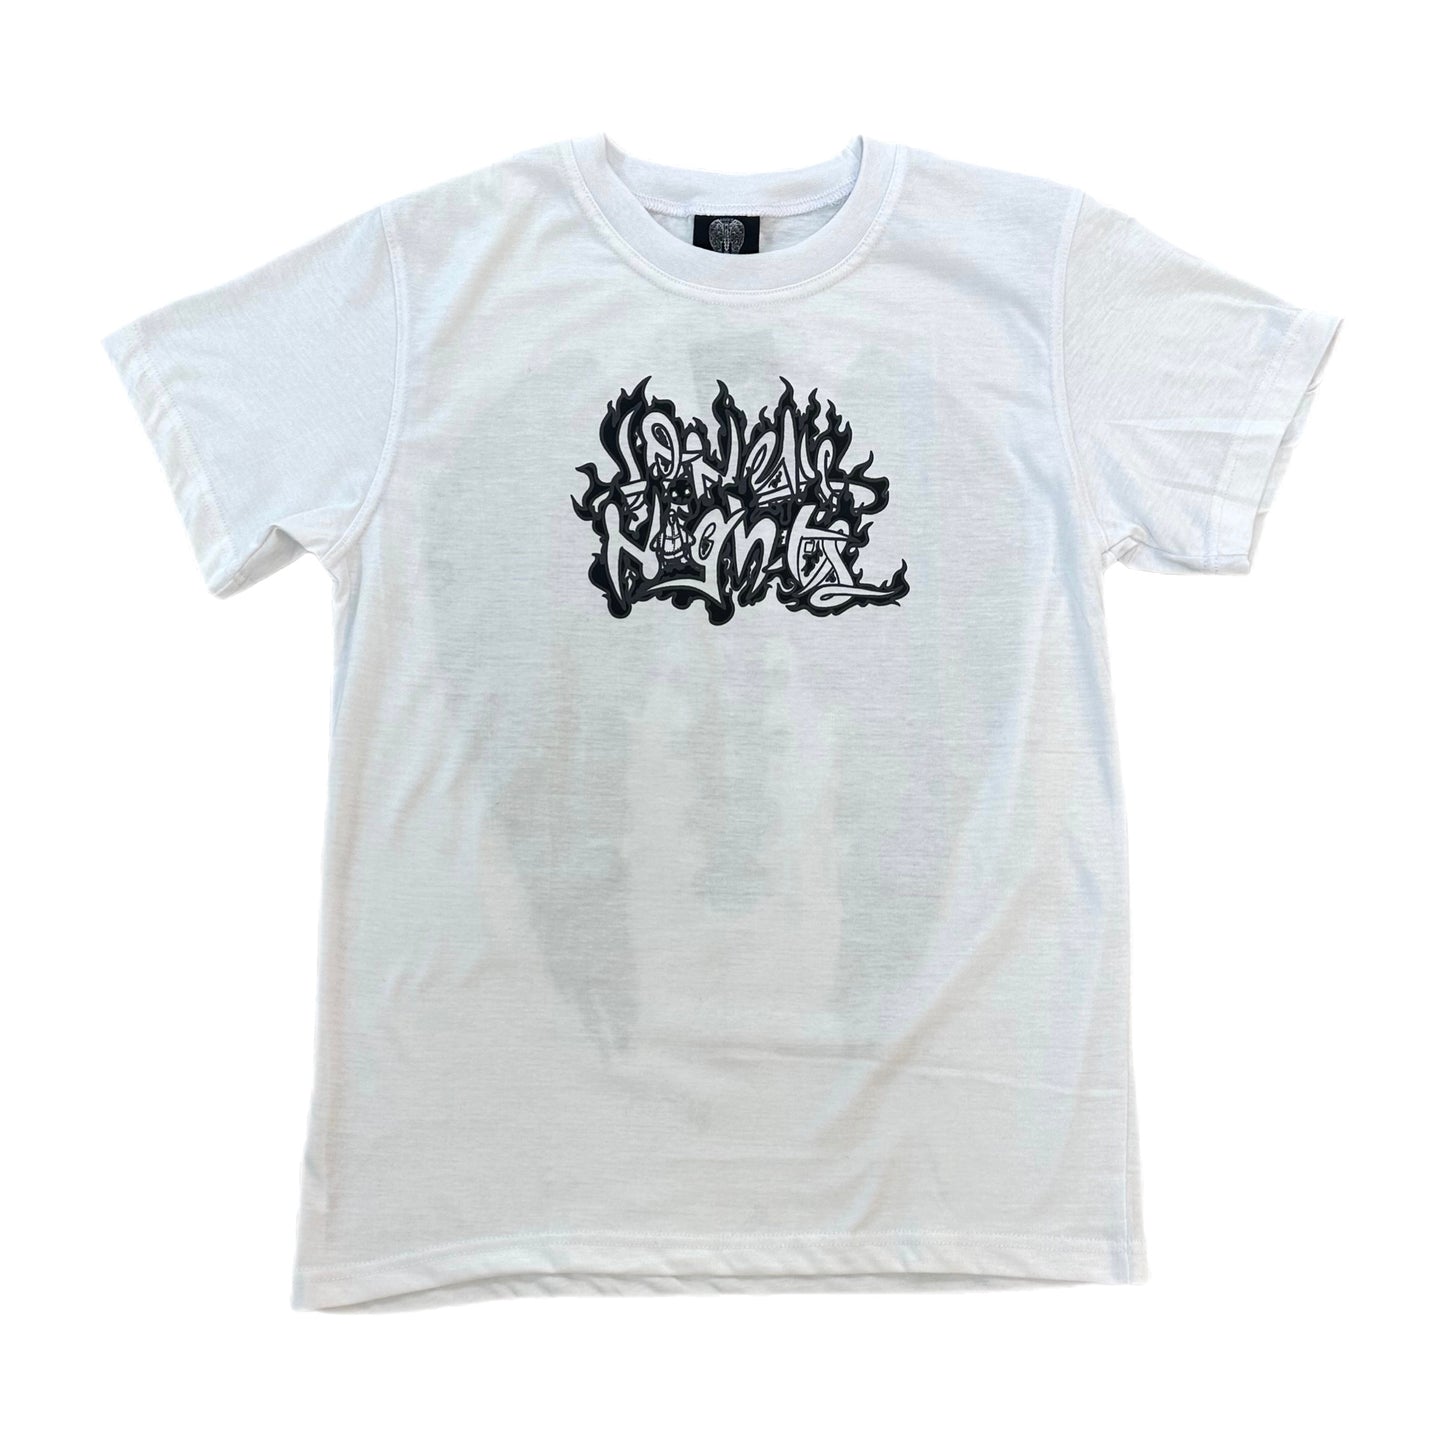 LONELY NIGHTS FLAME LOGO TEE WHITE/BLACK